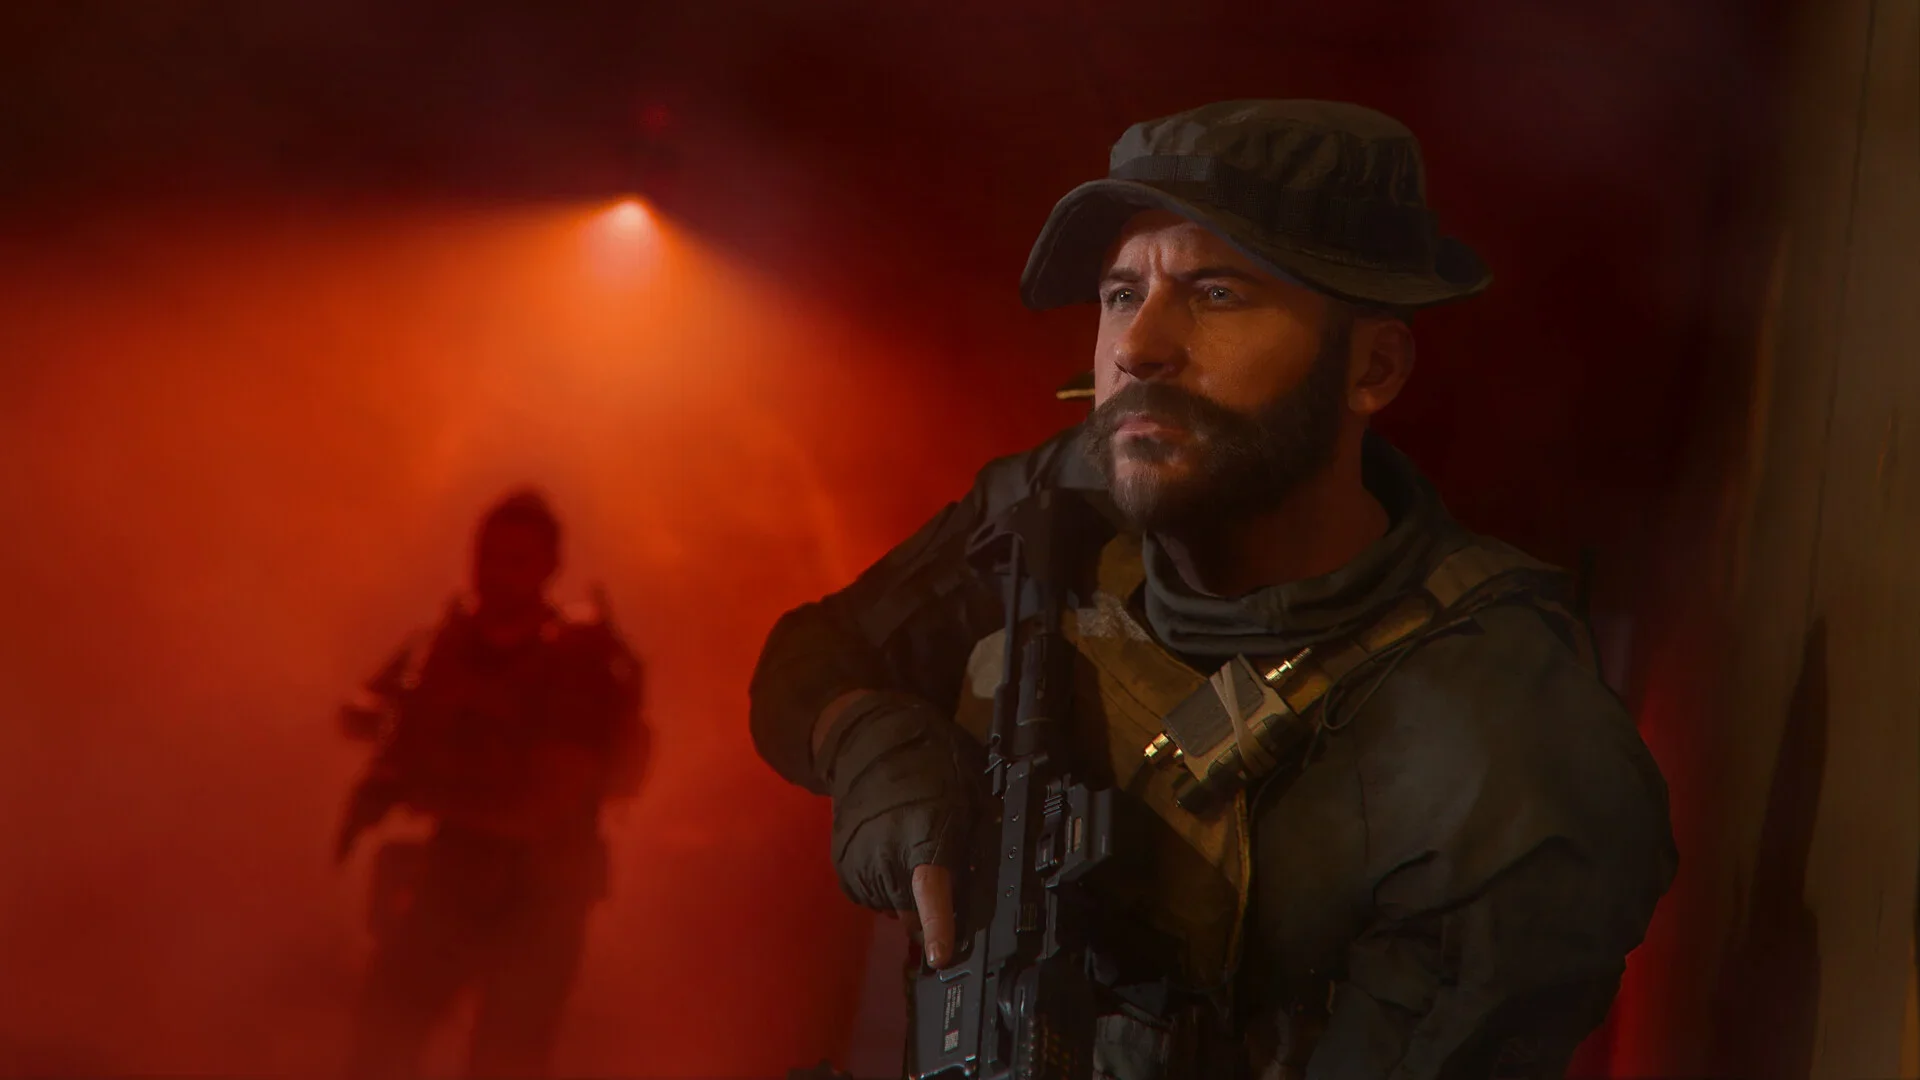 Activision has released a full trailer and screenshots of Call of Duty: Modern Warfare 3